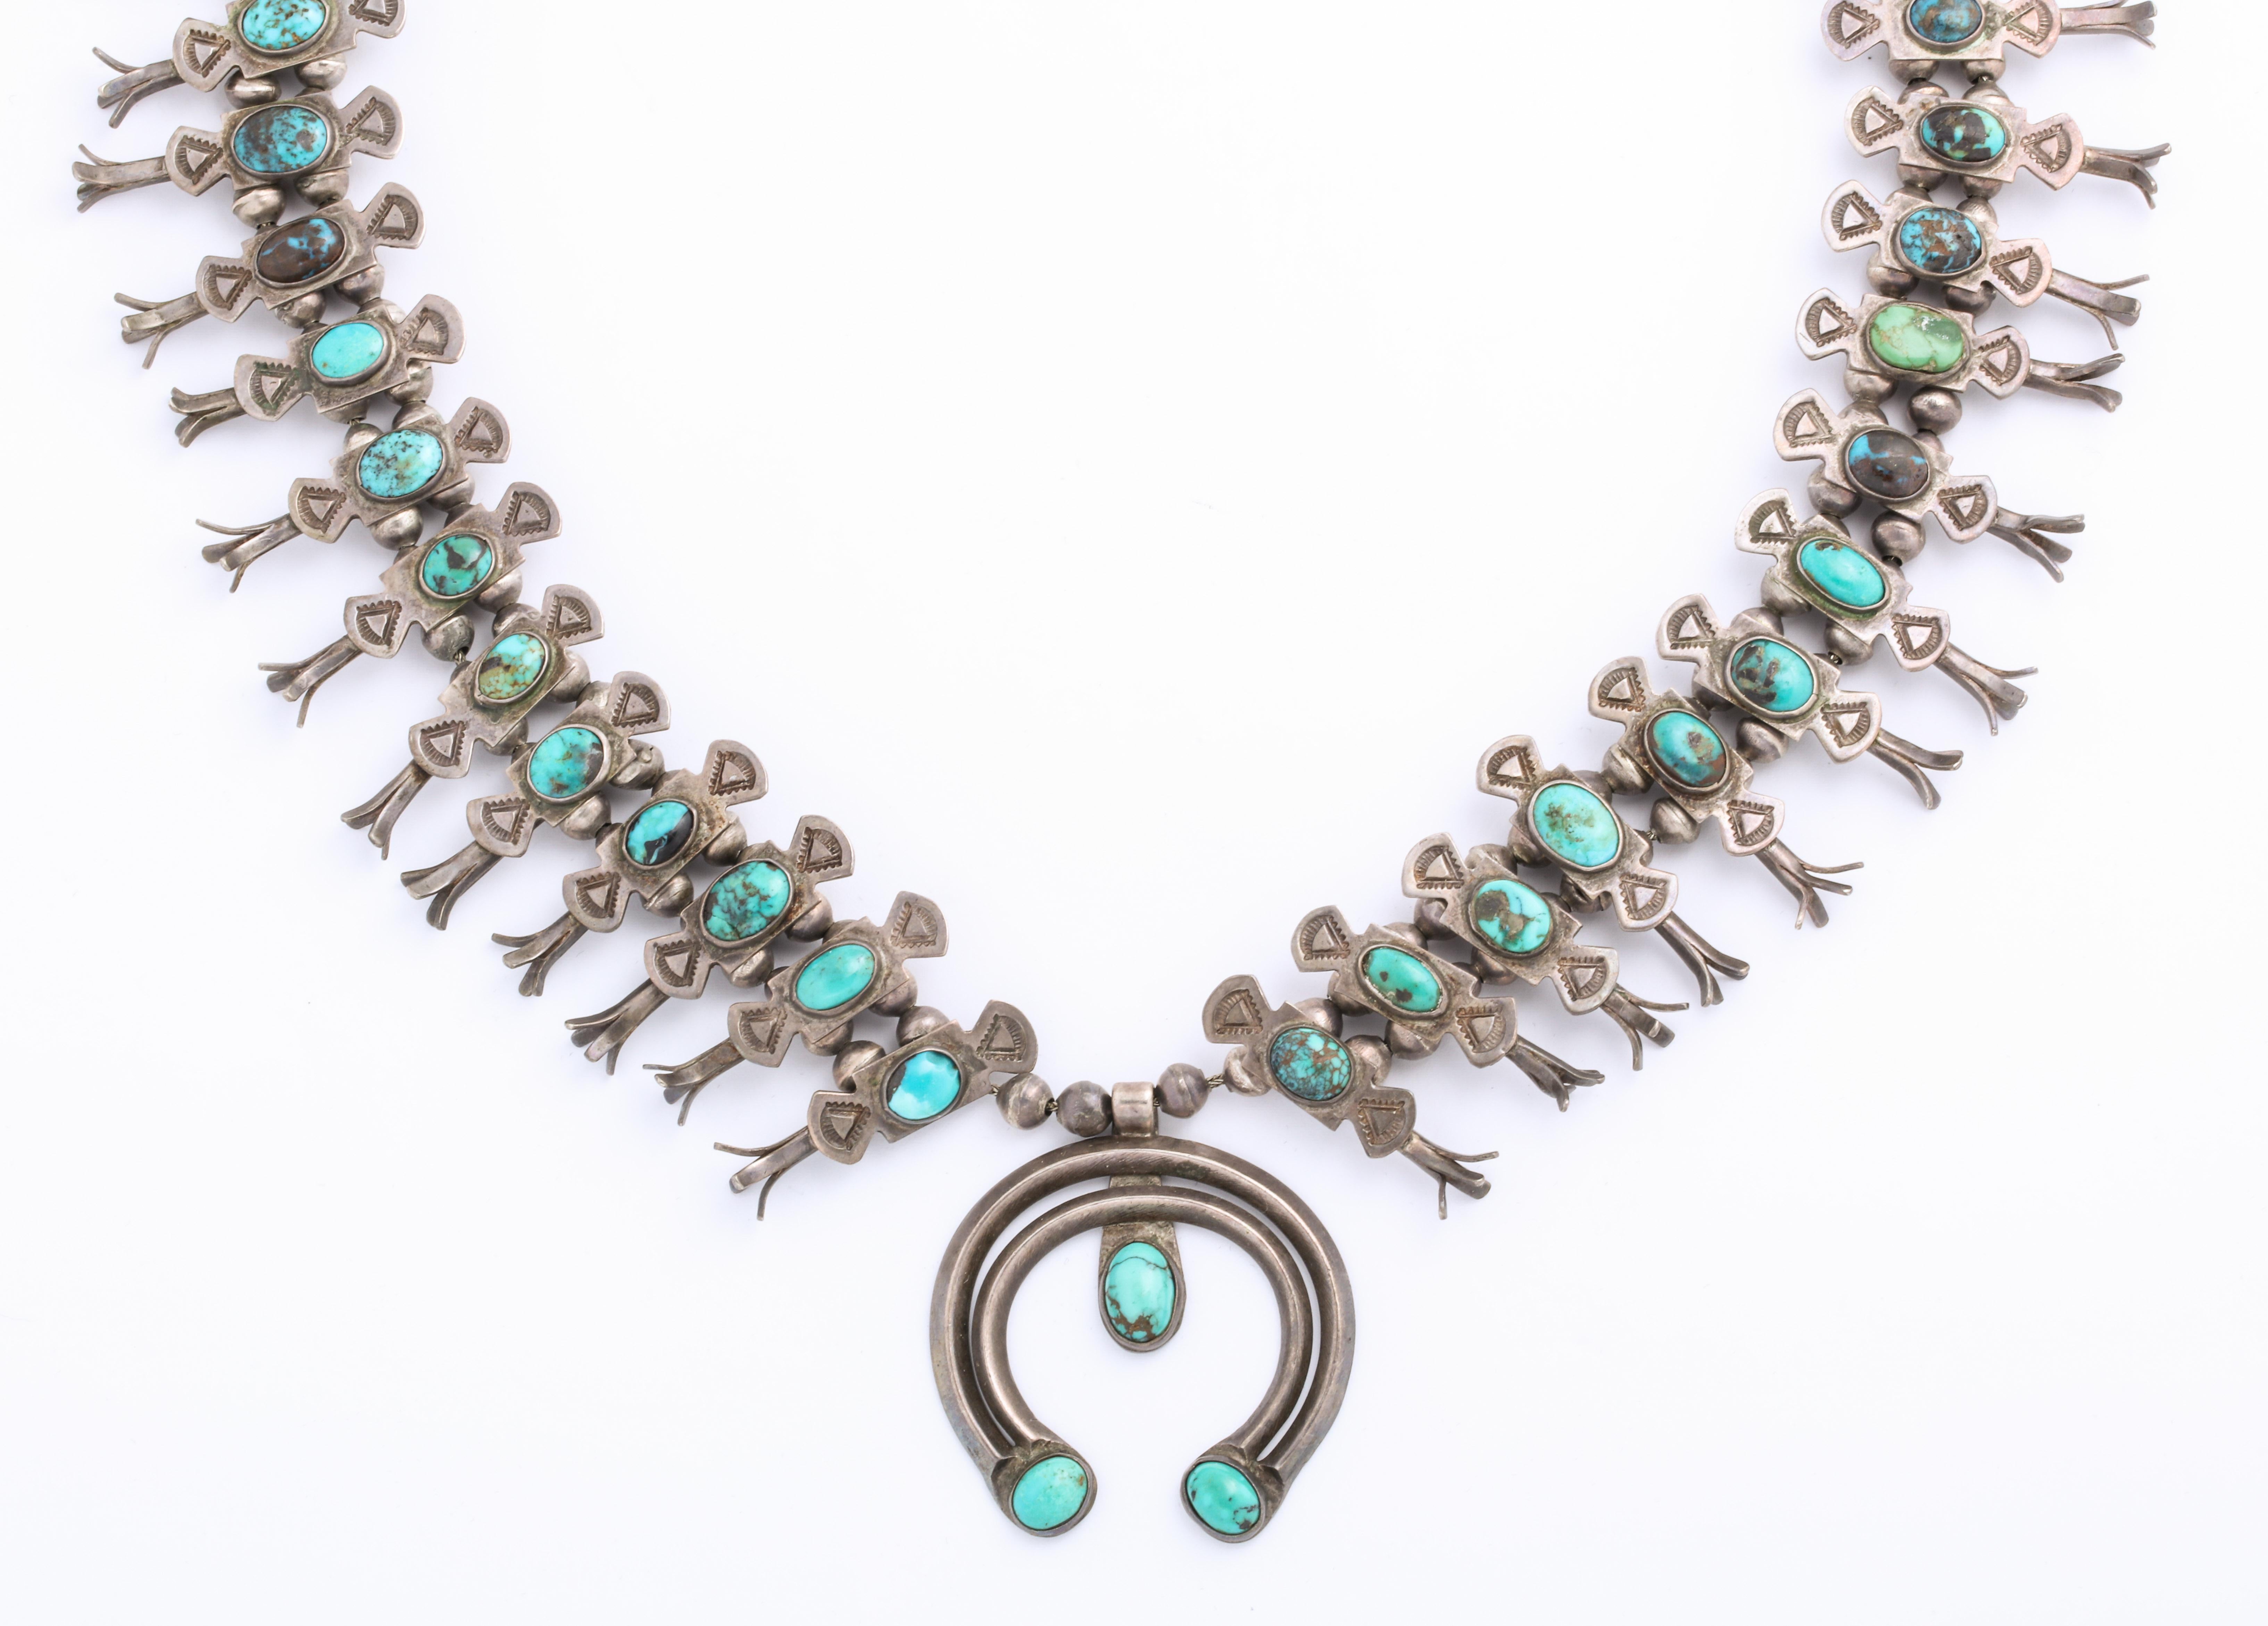 A magnificent and elegant Navajo Squash Blossom Necklace made by Eskie Tsosie c. 1940 places a display of graceful, handmade squash blossoms around your neck. The blossoms hold natural turquoise.. Rarely do you find a squash blossom necklace this